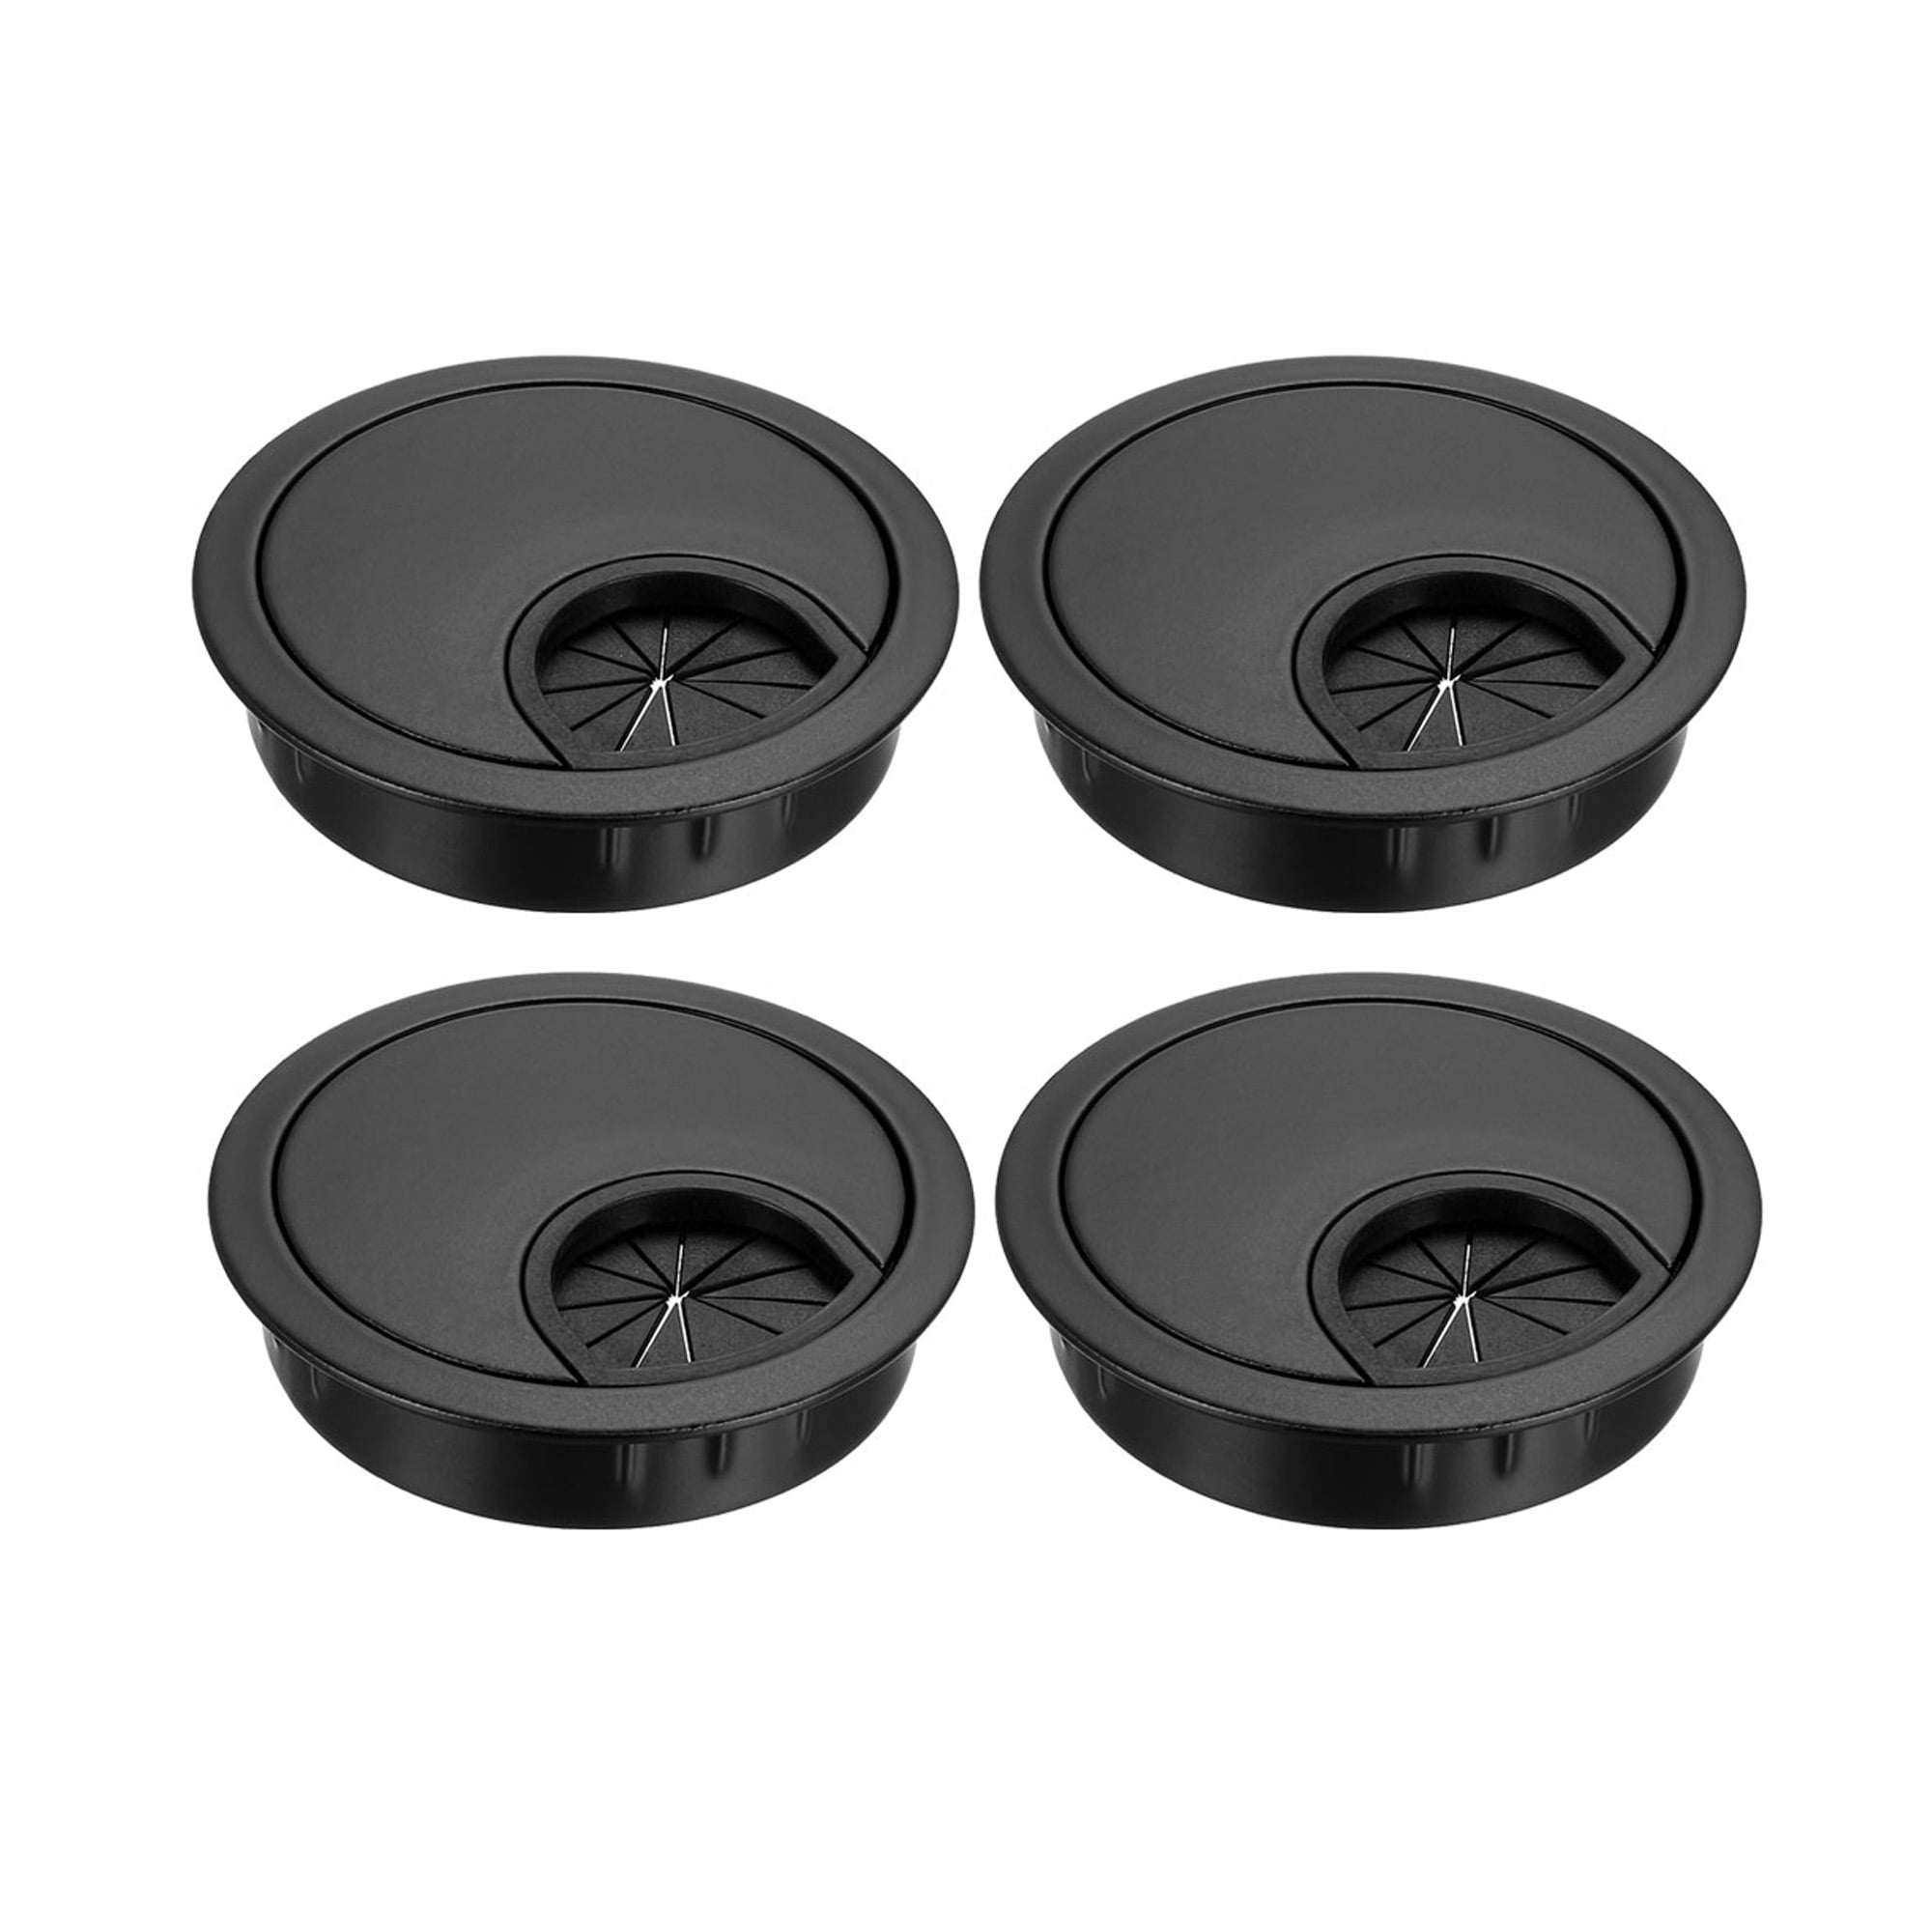 3 Pcs Desk Grommet,2 Inch Mounting Cord Hole Cover,Use for Organize The Wires from Computer Desks,PC Peripheral,Office Equipment,Black 